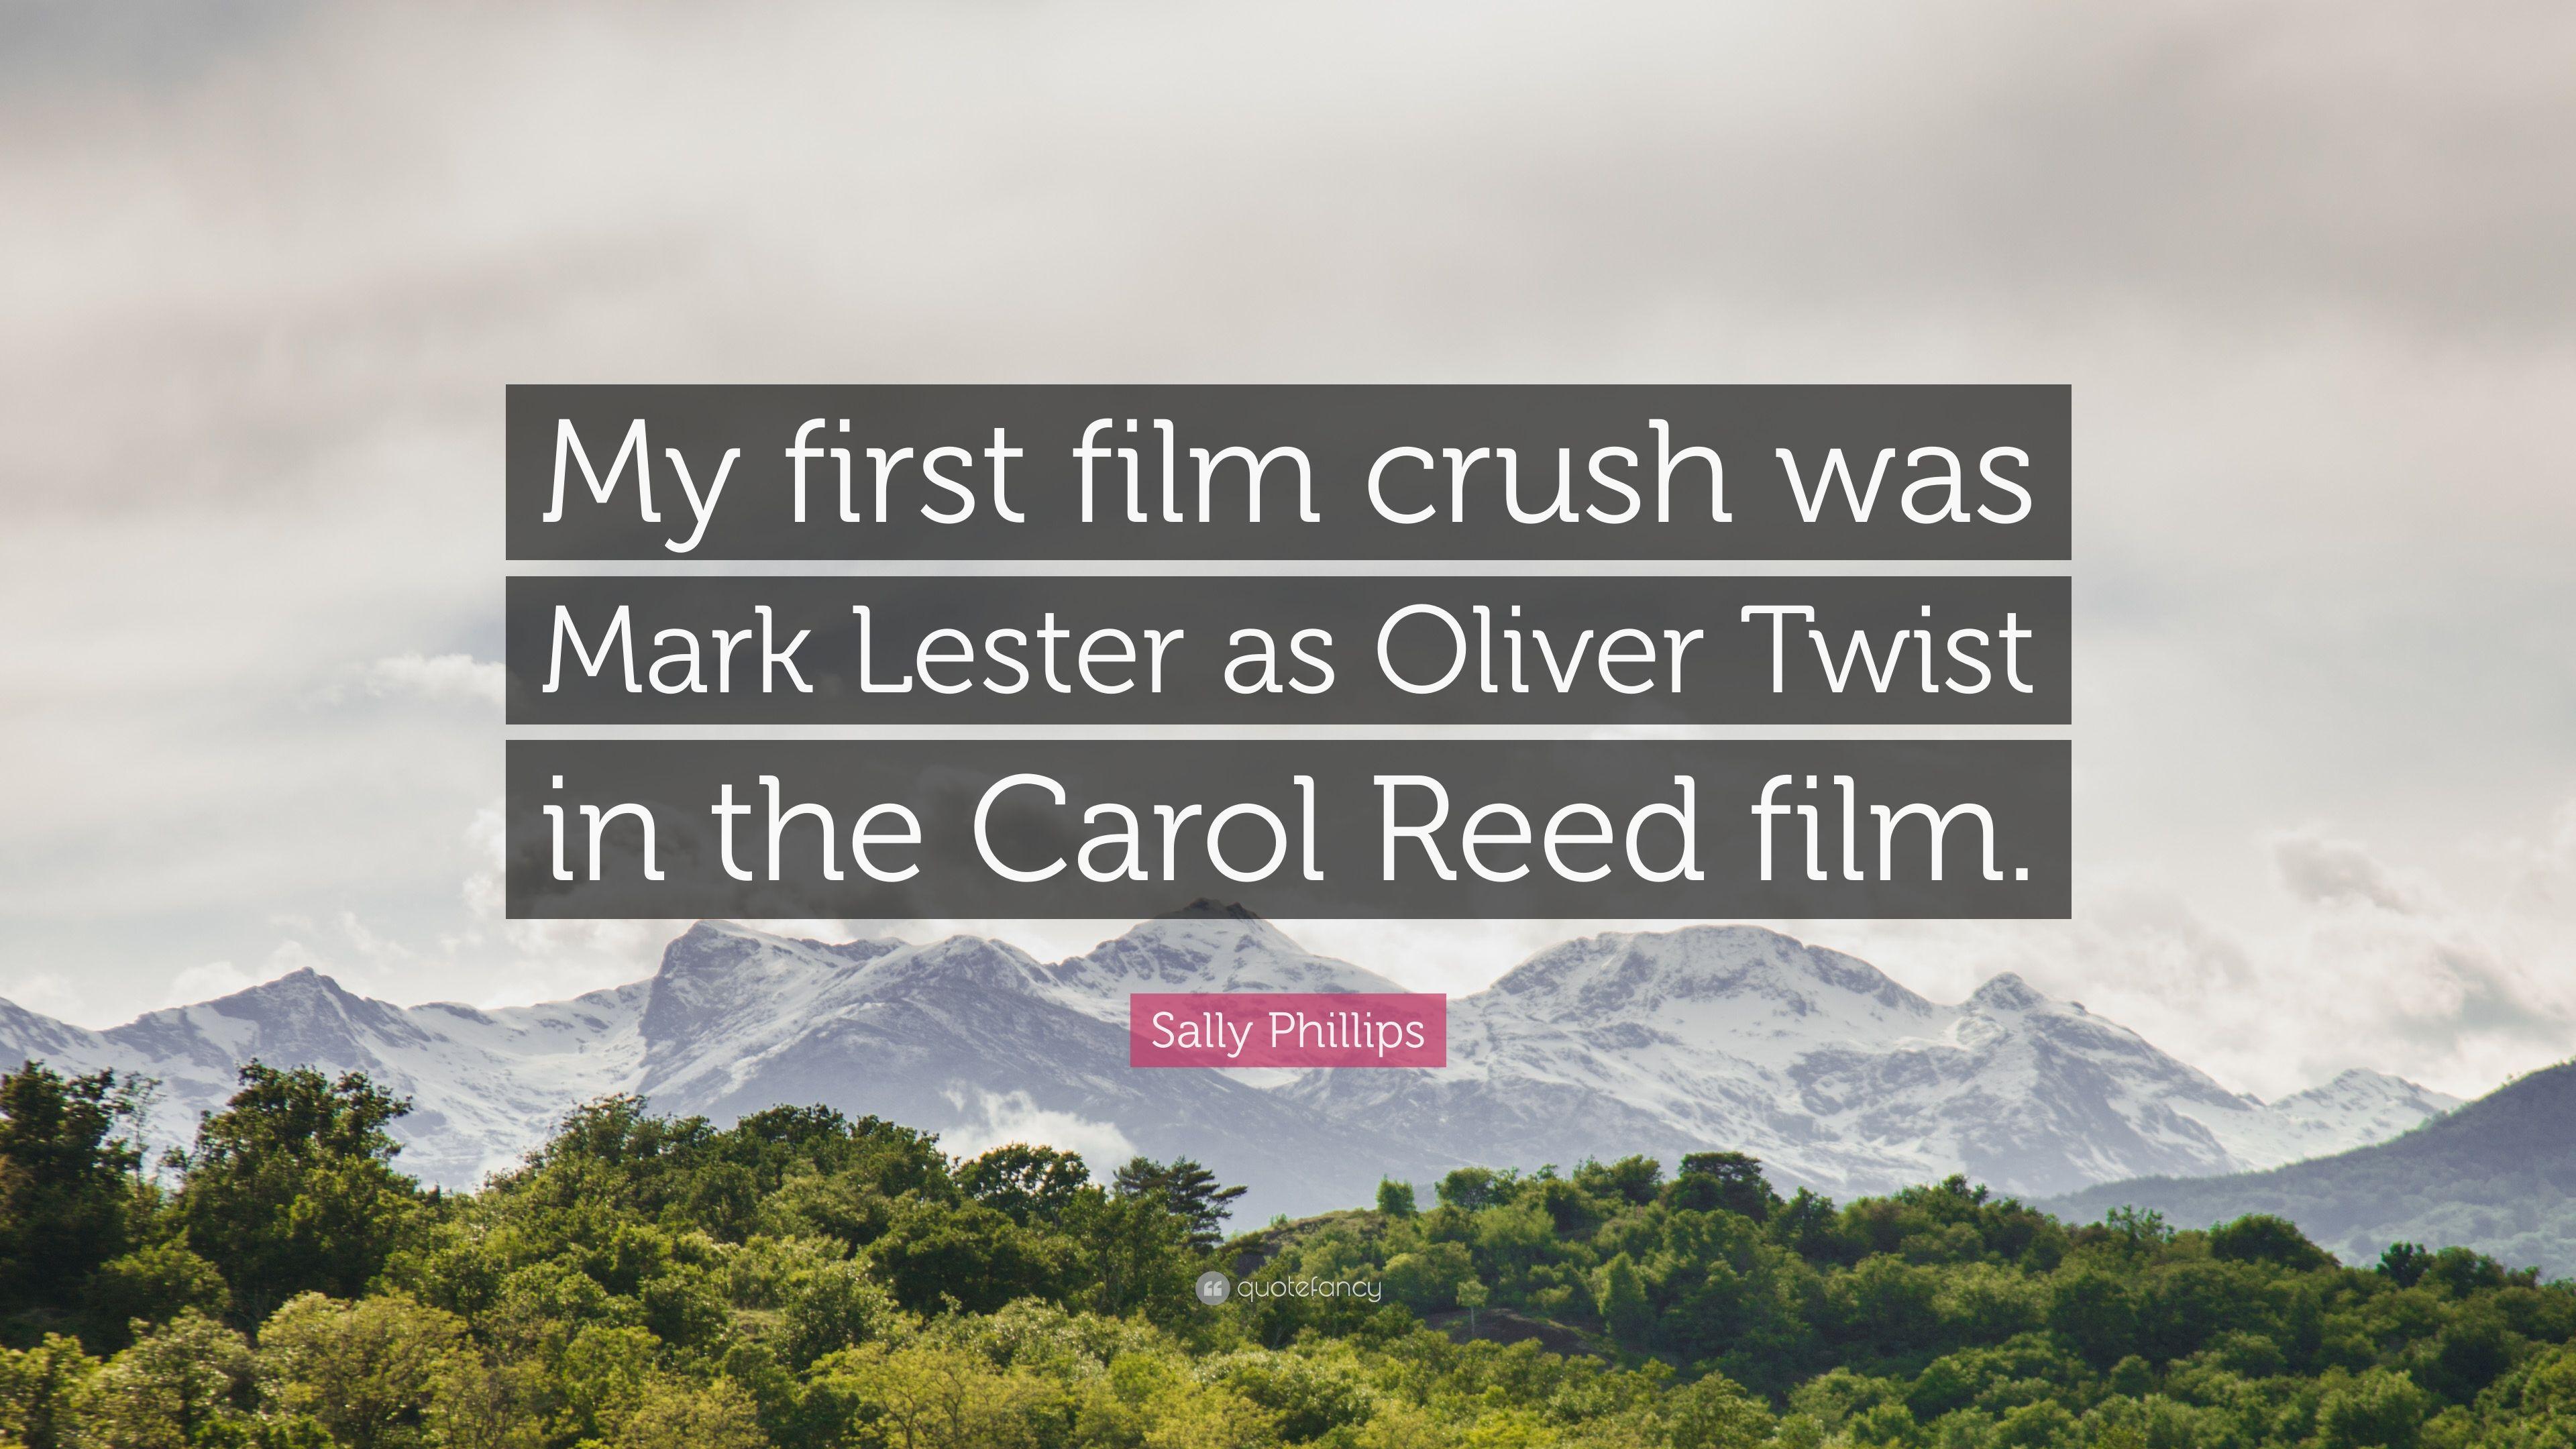 Sally Phillips Quote: “My first film crush was Mark Lester as